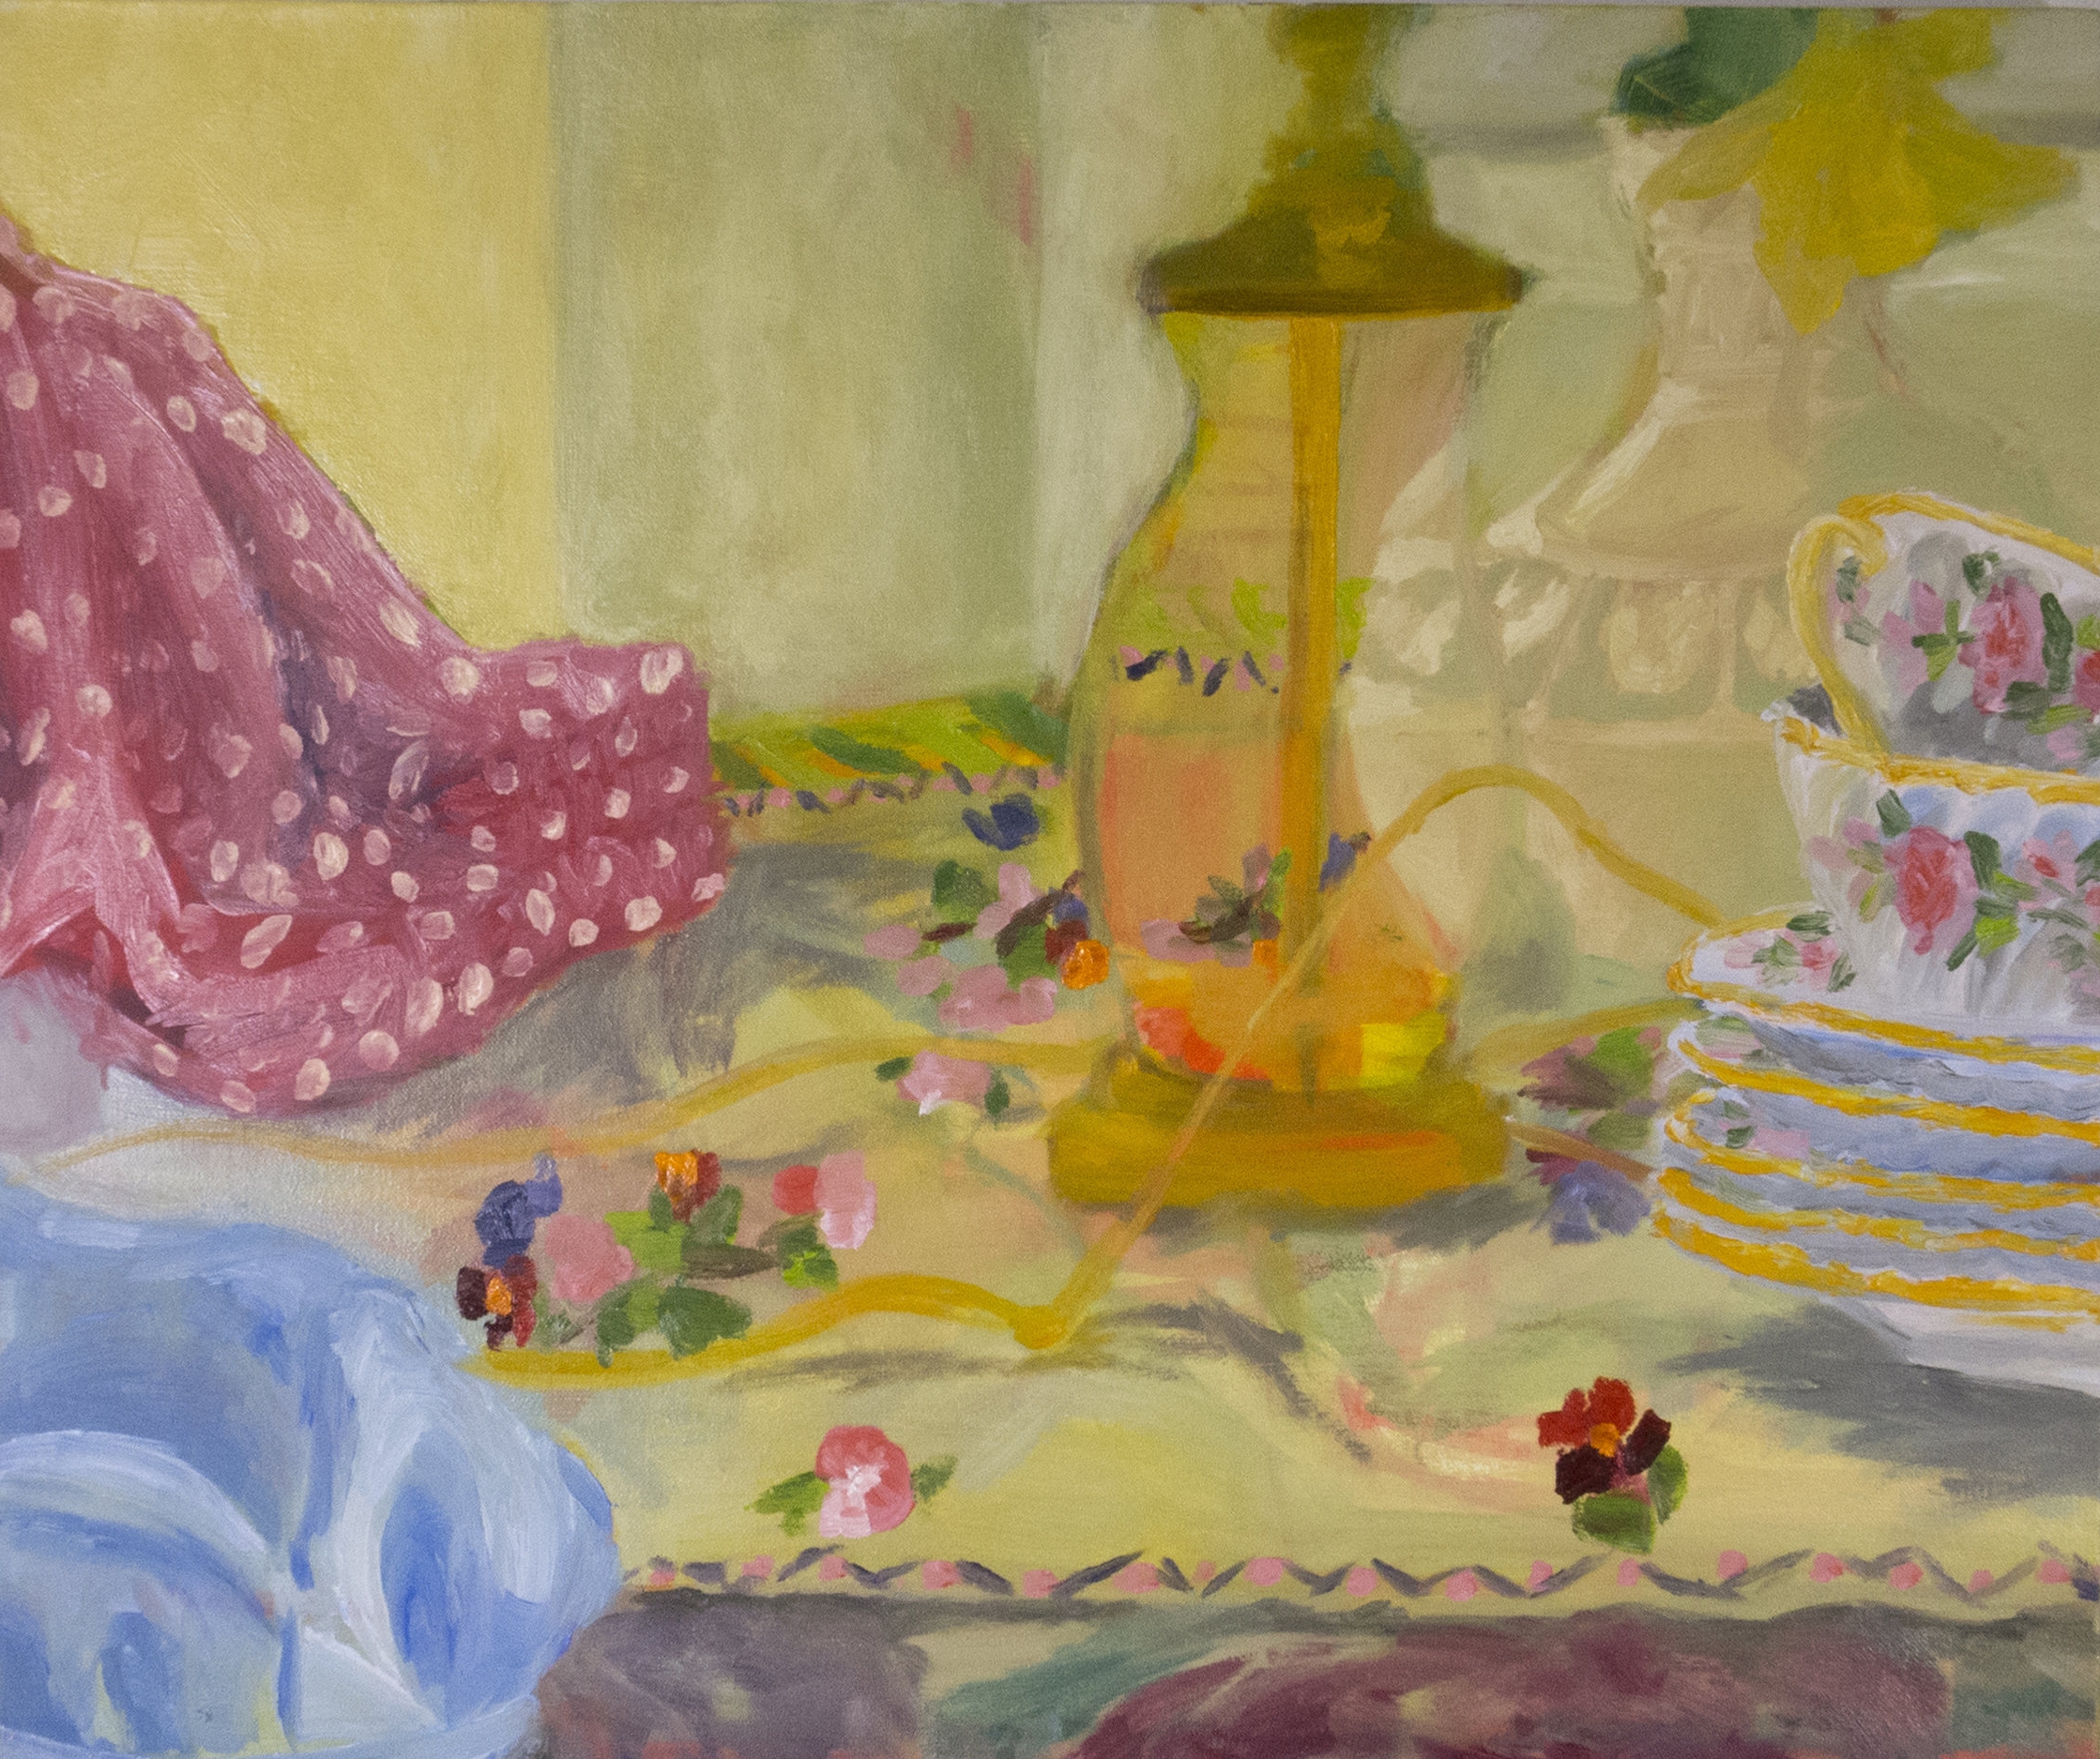 Still Life With Fake Flowers, Lamp, Vase, Cups, and Plates